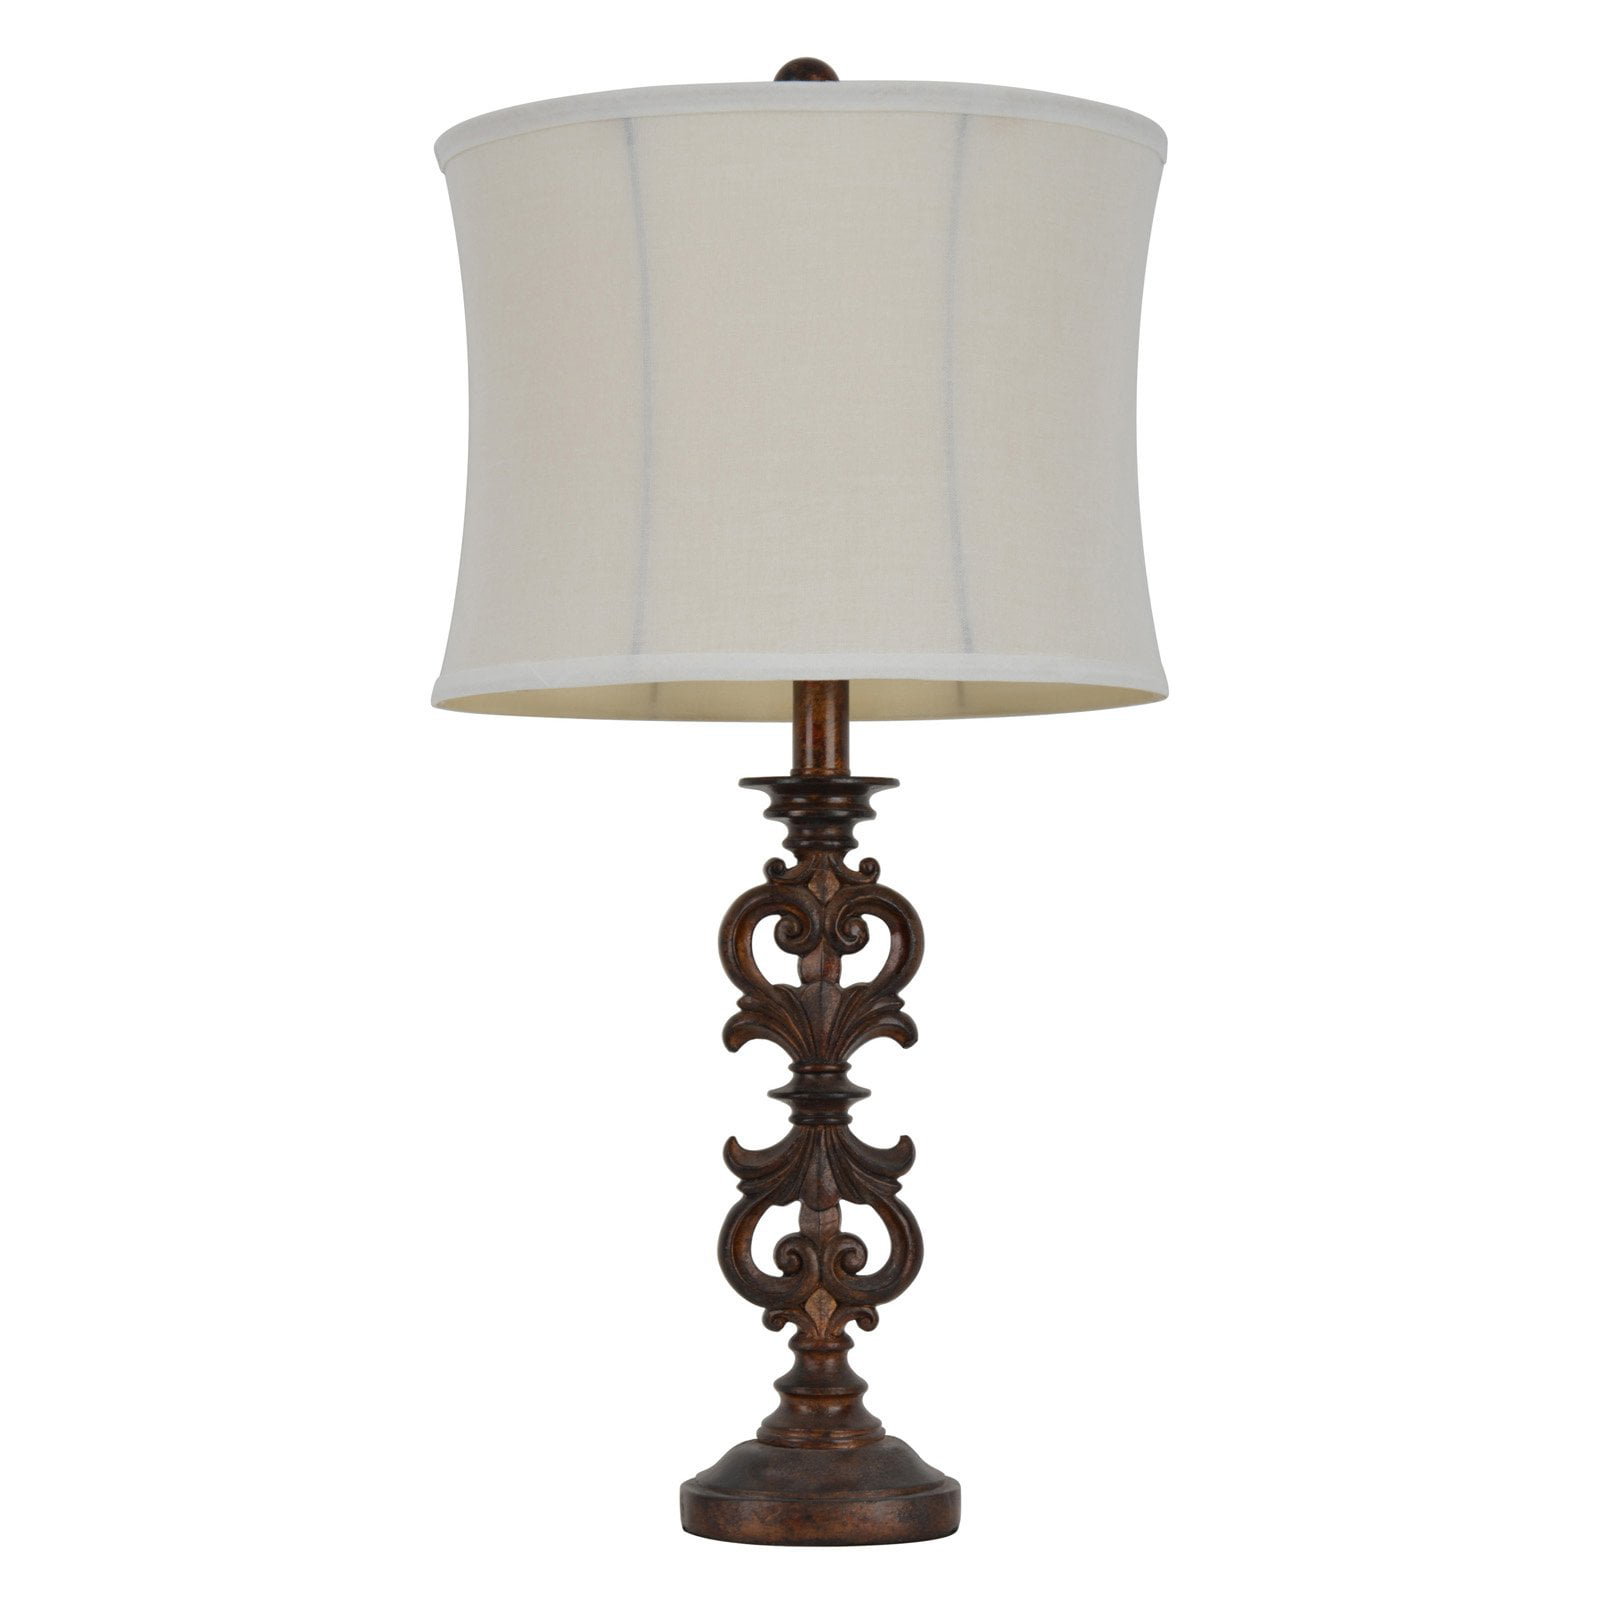 Decor Therapy Antique Rust Iron Look Table Lamp with Natural Linen Shade, Dark Brown